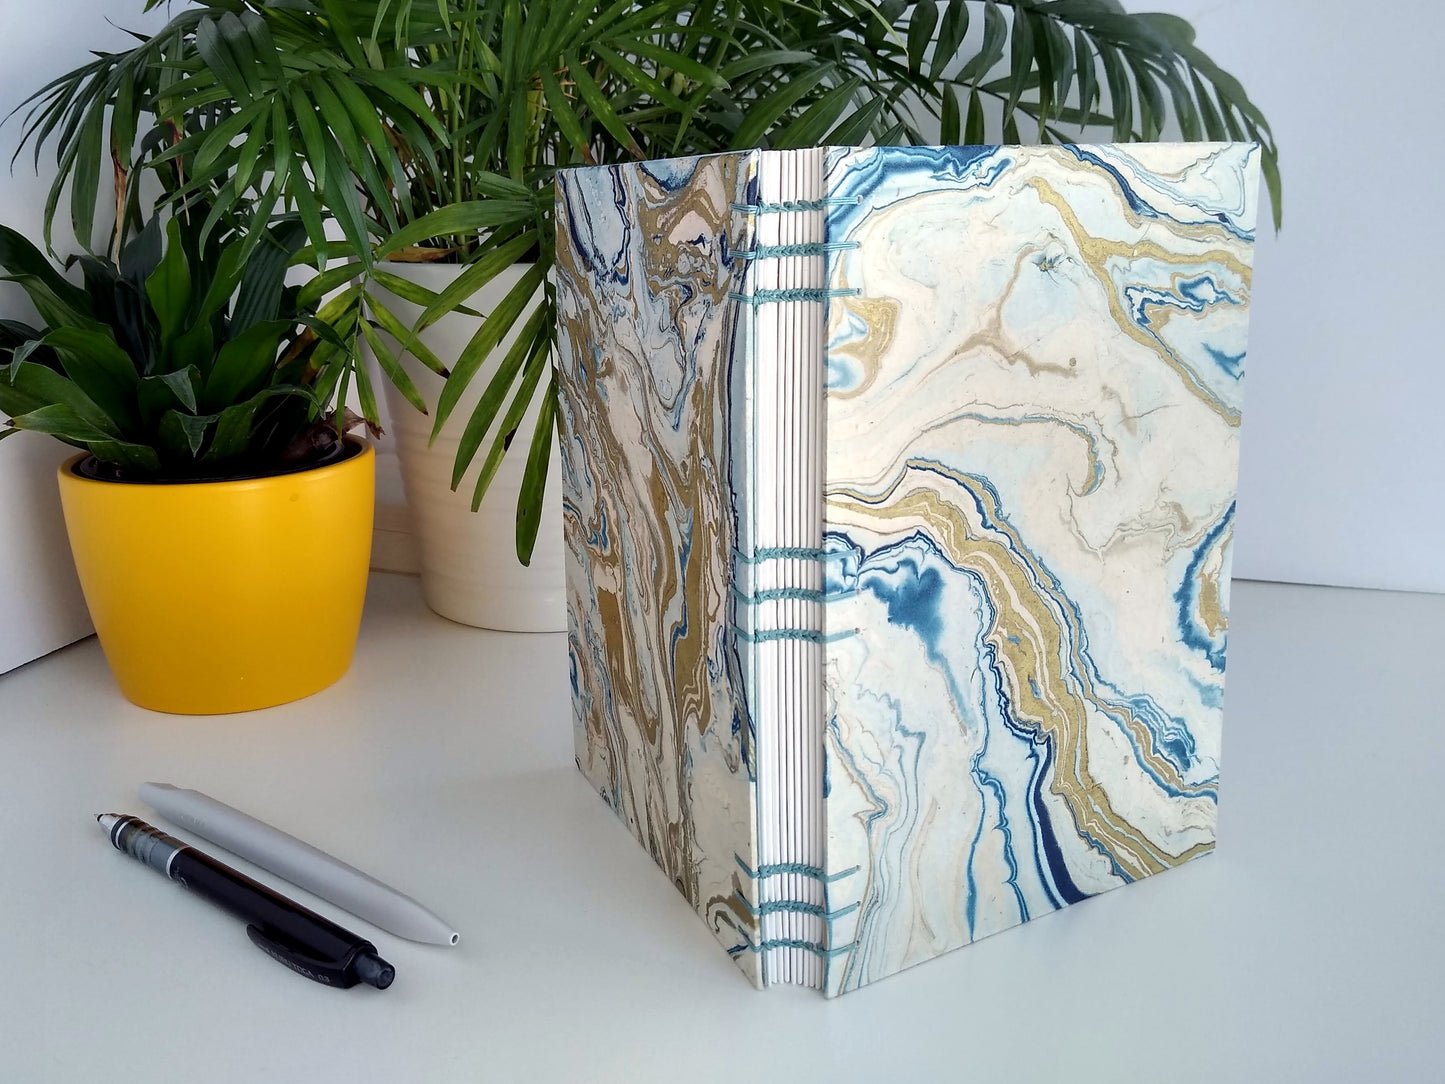 A handmade journal sits upright beside two potted plants, a grey pen, and a black mechanical pencil. The cover of the journal is cream paper, marbled with blue and gold. It's turned to show the open spine and the blue stitching holding it together.